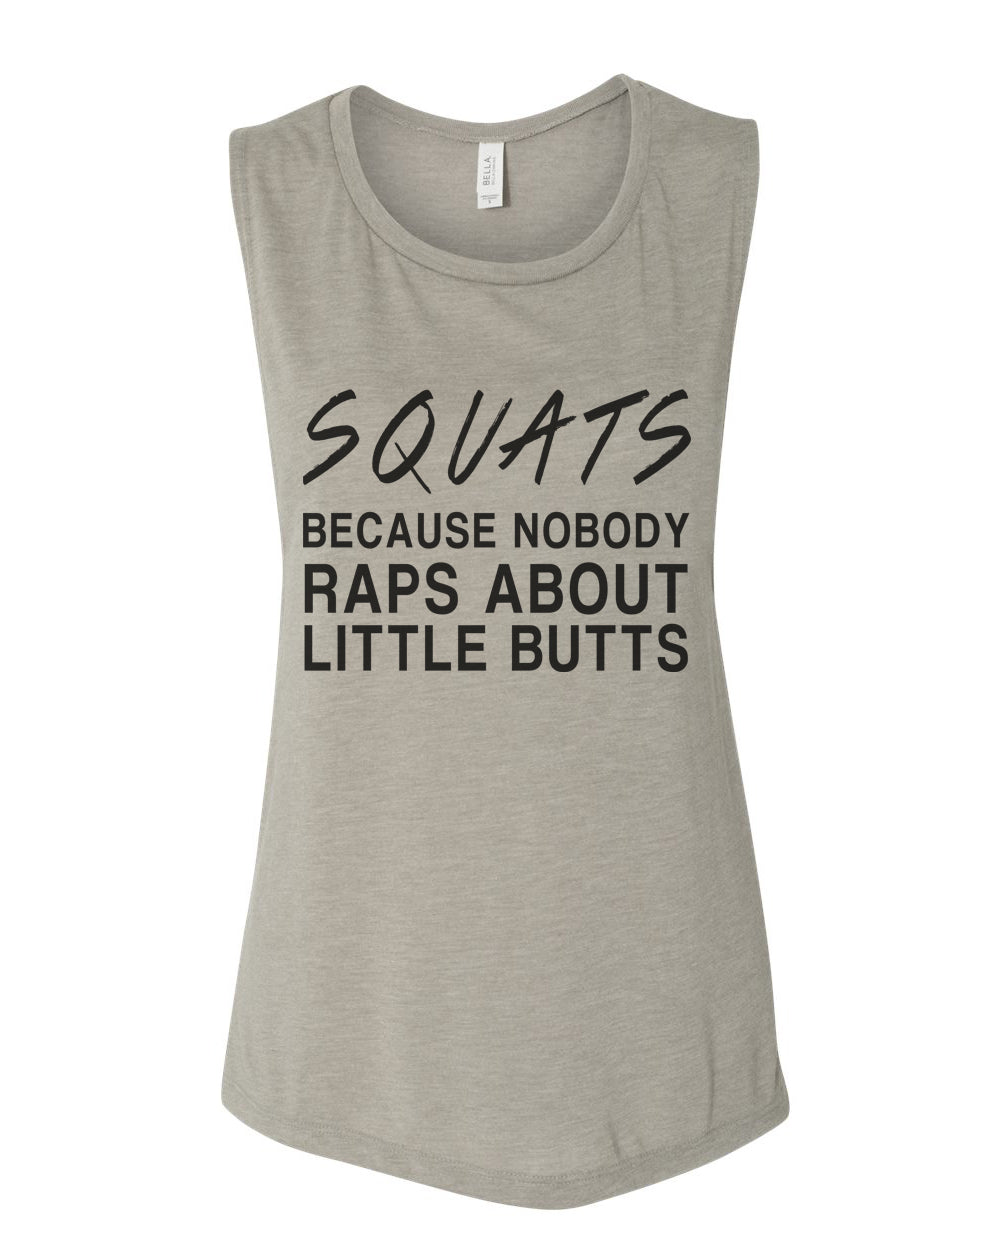 Squats Because Nobody Raps About Little Butts Flowy Scoop